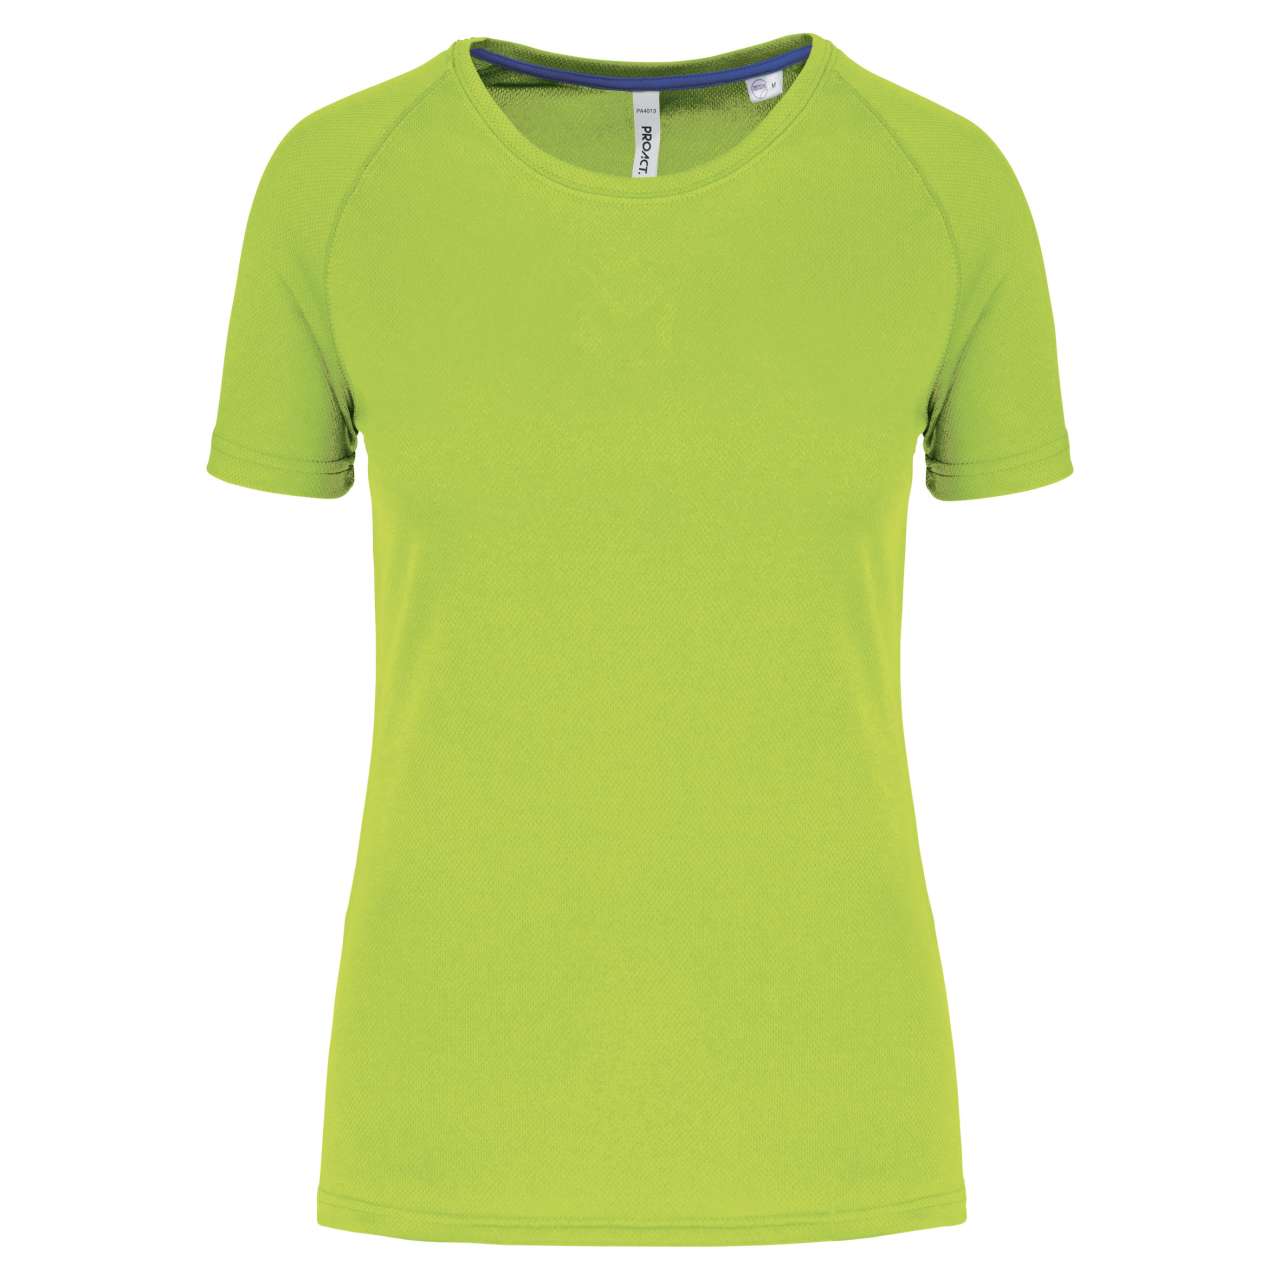 Promo  LADIES' RECYCLED ROUND NECK SPORTS T-SHIRT